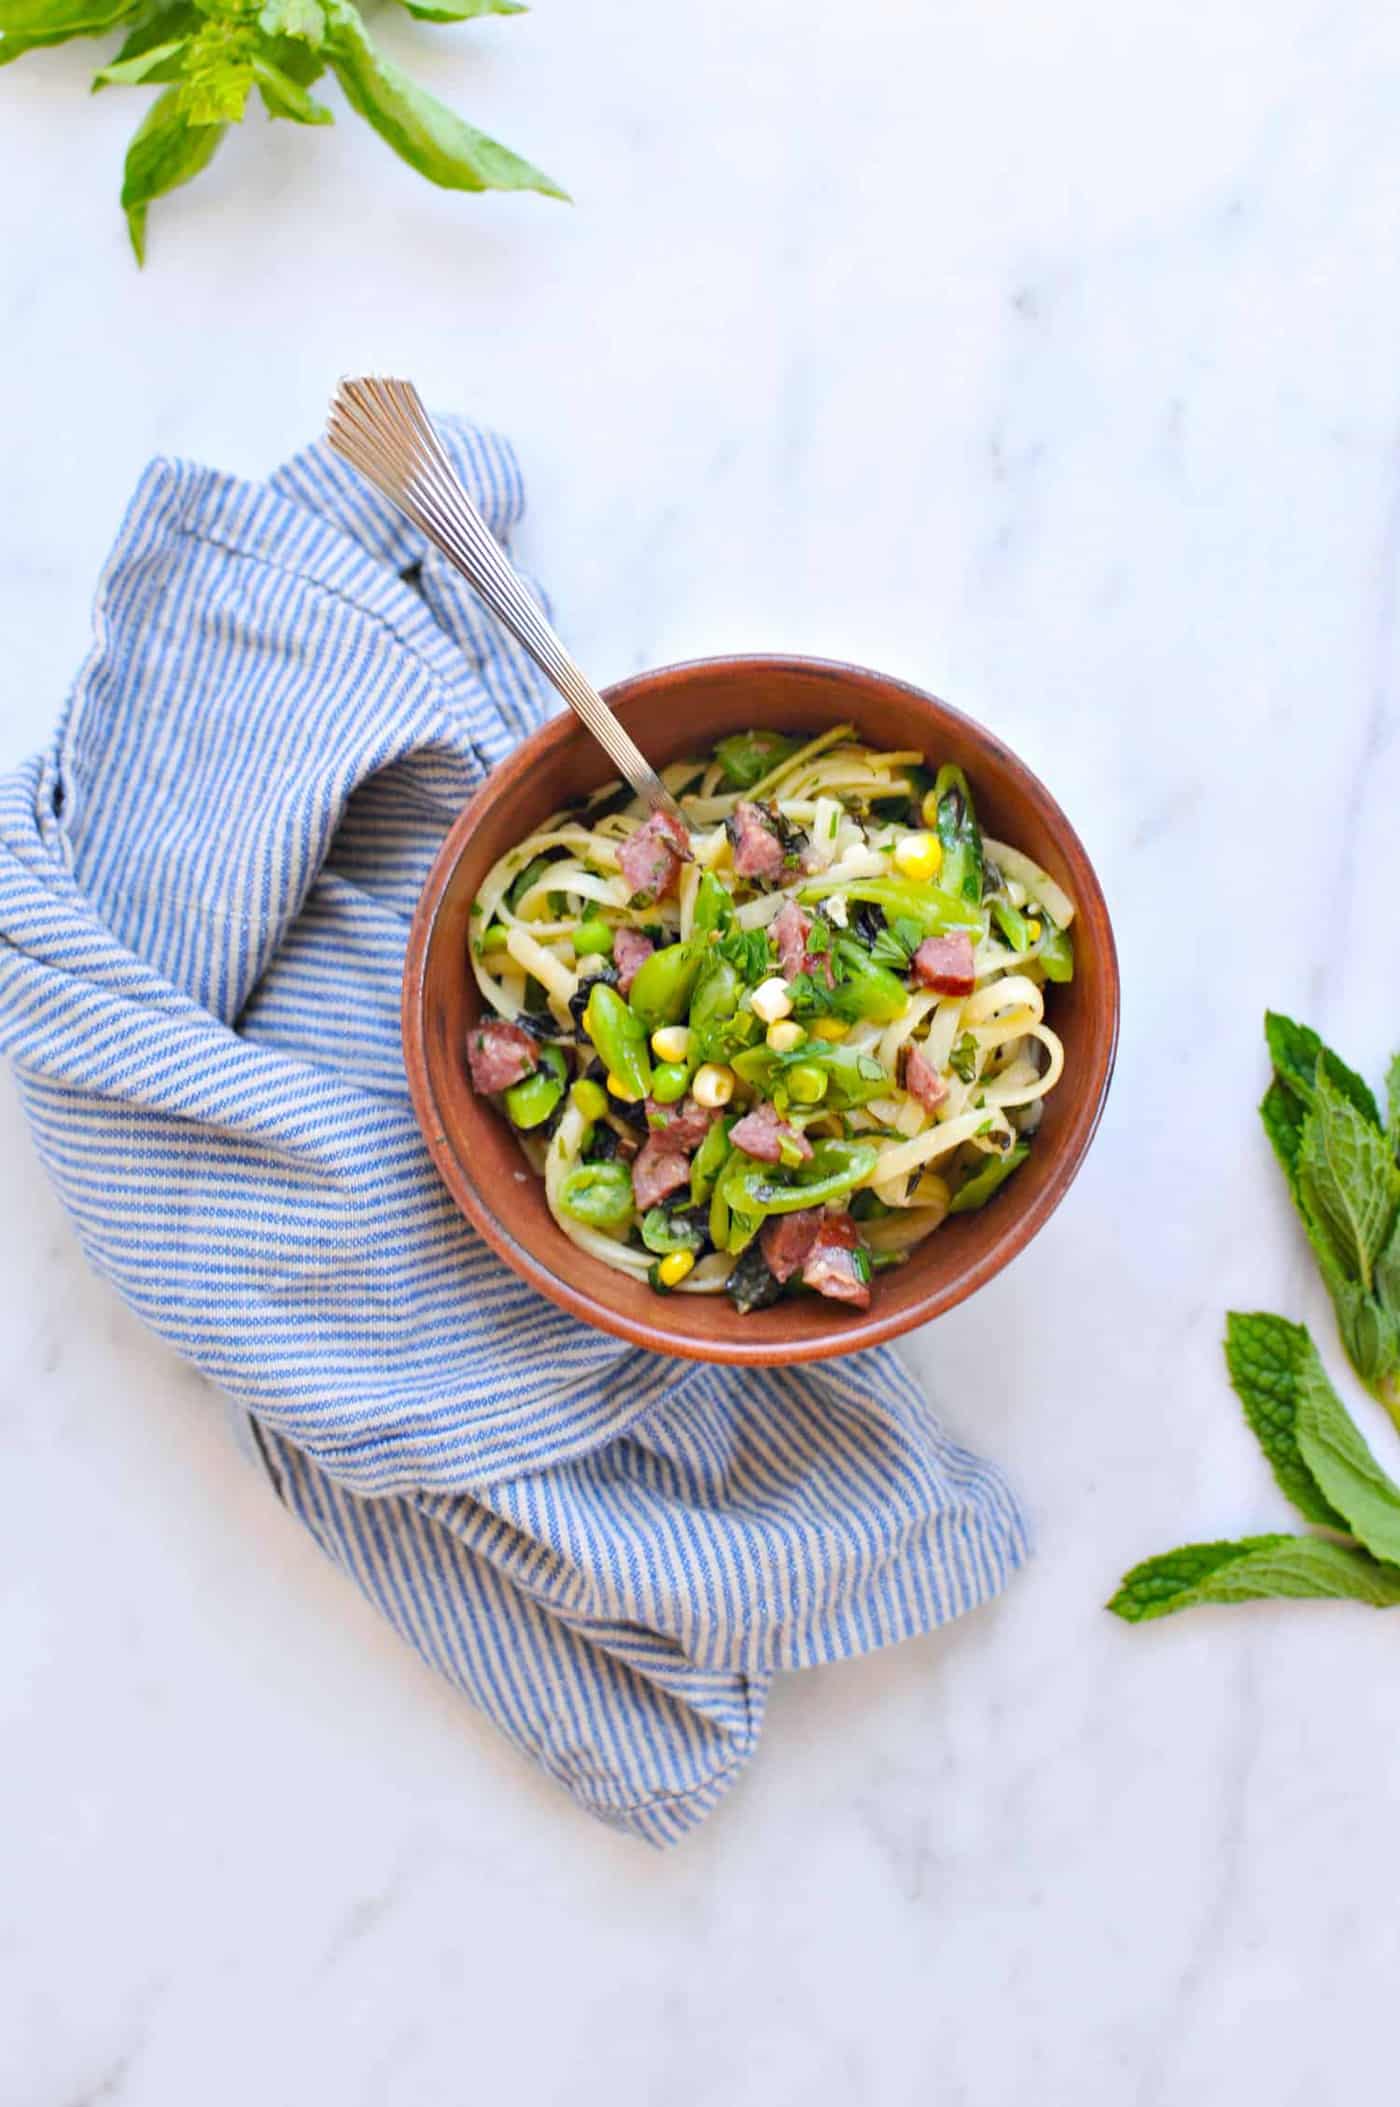 Endless Summer Noodle Bowls: Miso Butter Linguine with Sweet Corn, Snap Peas + Summer Sausage recipe (via thepigandquill.com) #pasta #veggies #basil